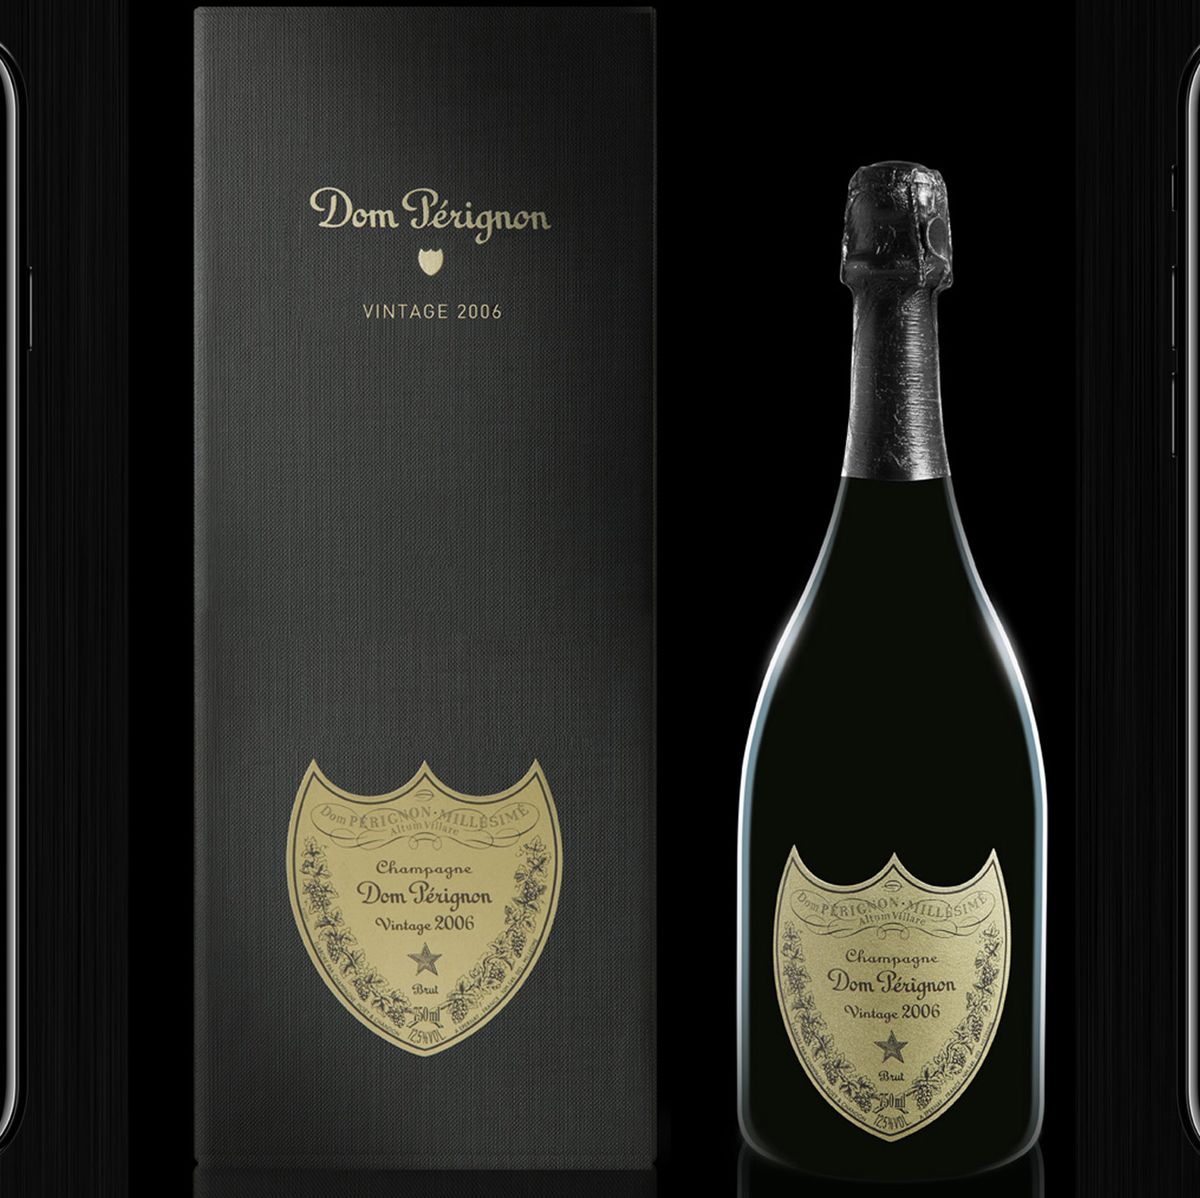 Dom Perignon Champagne Price - Indulgence or Investment